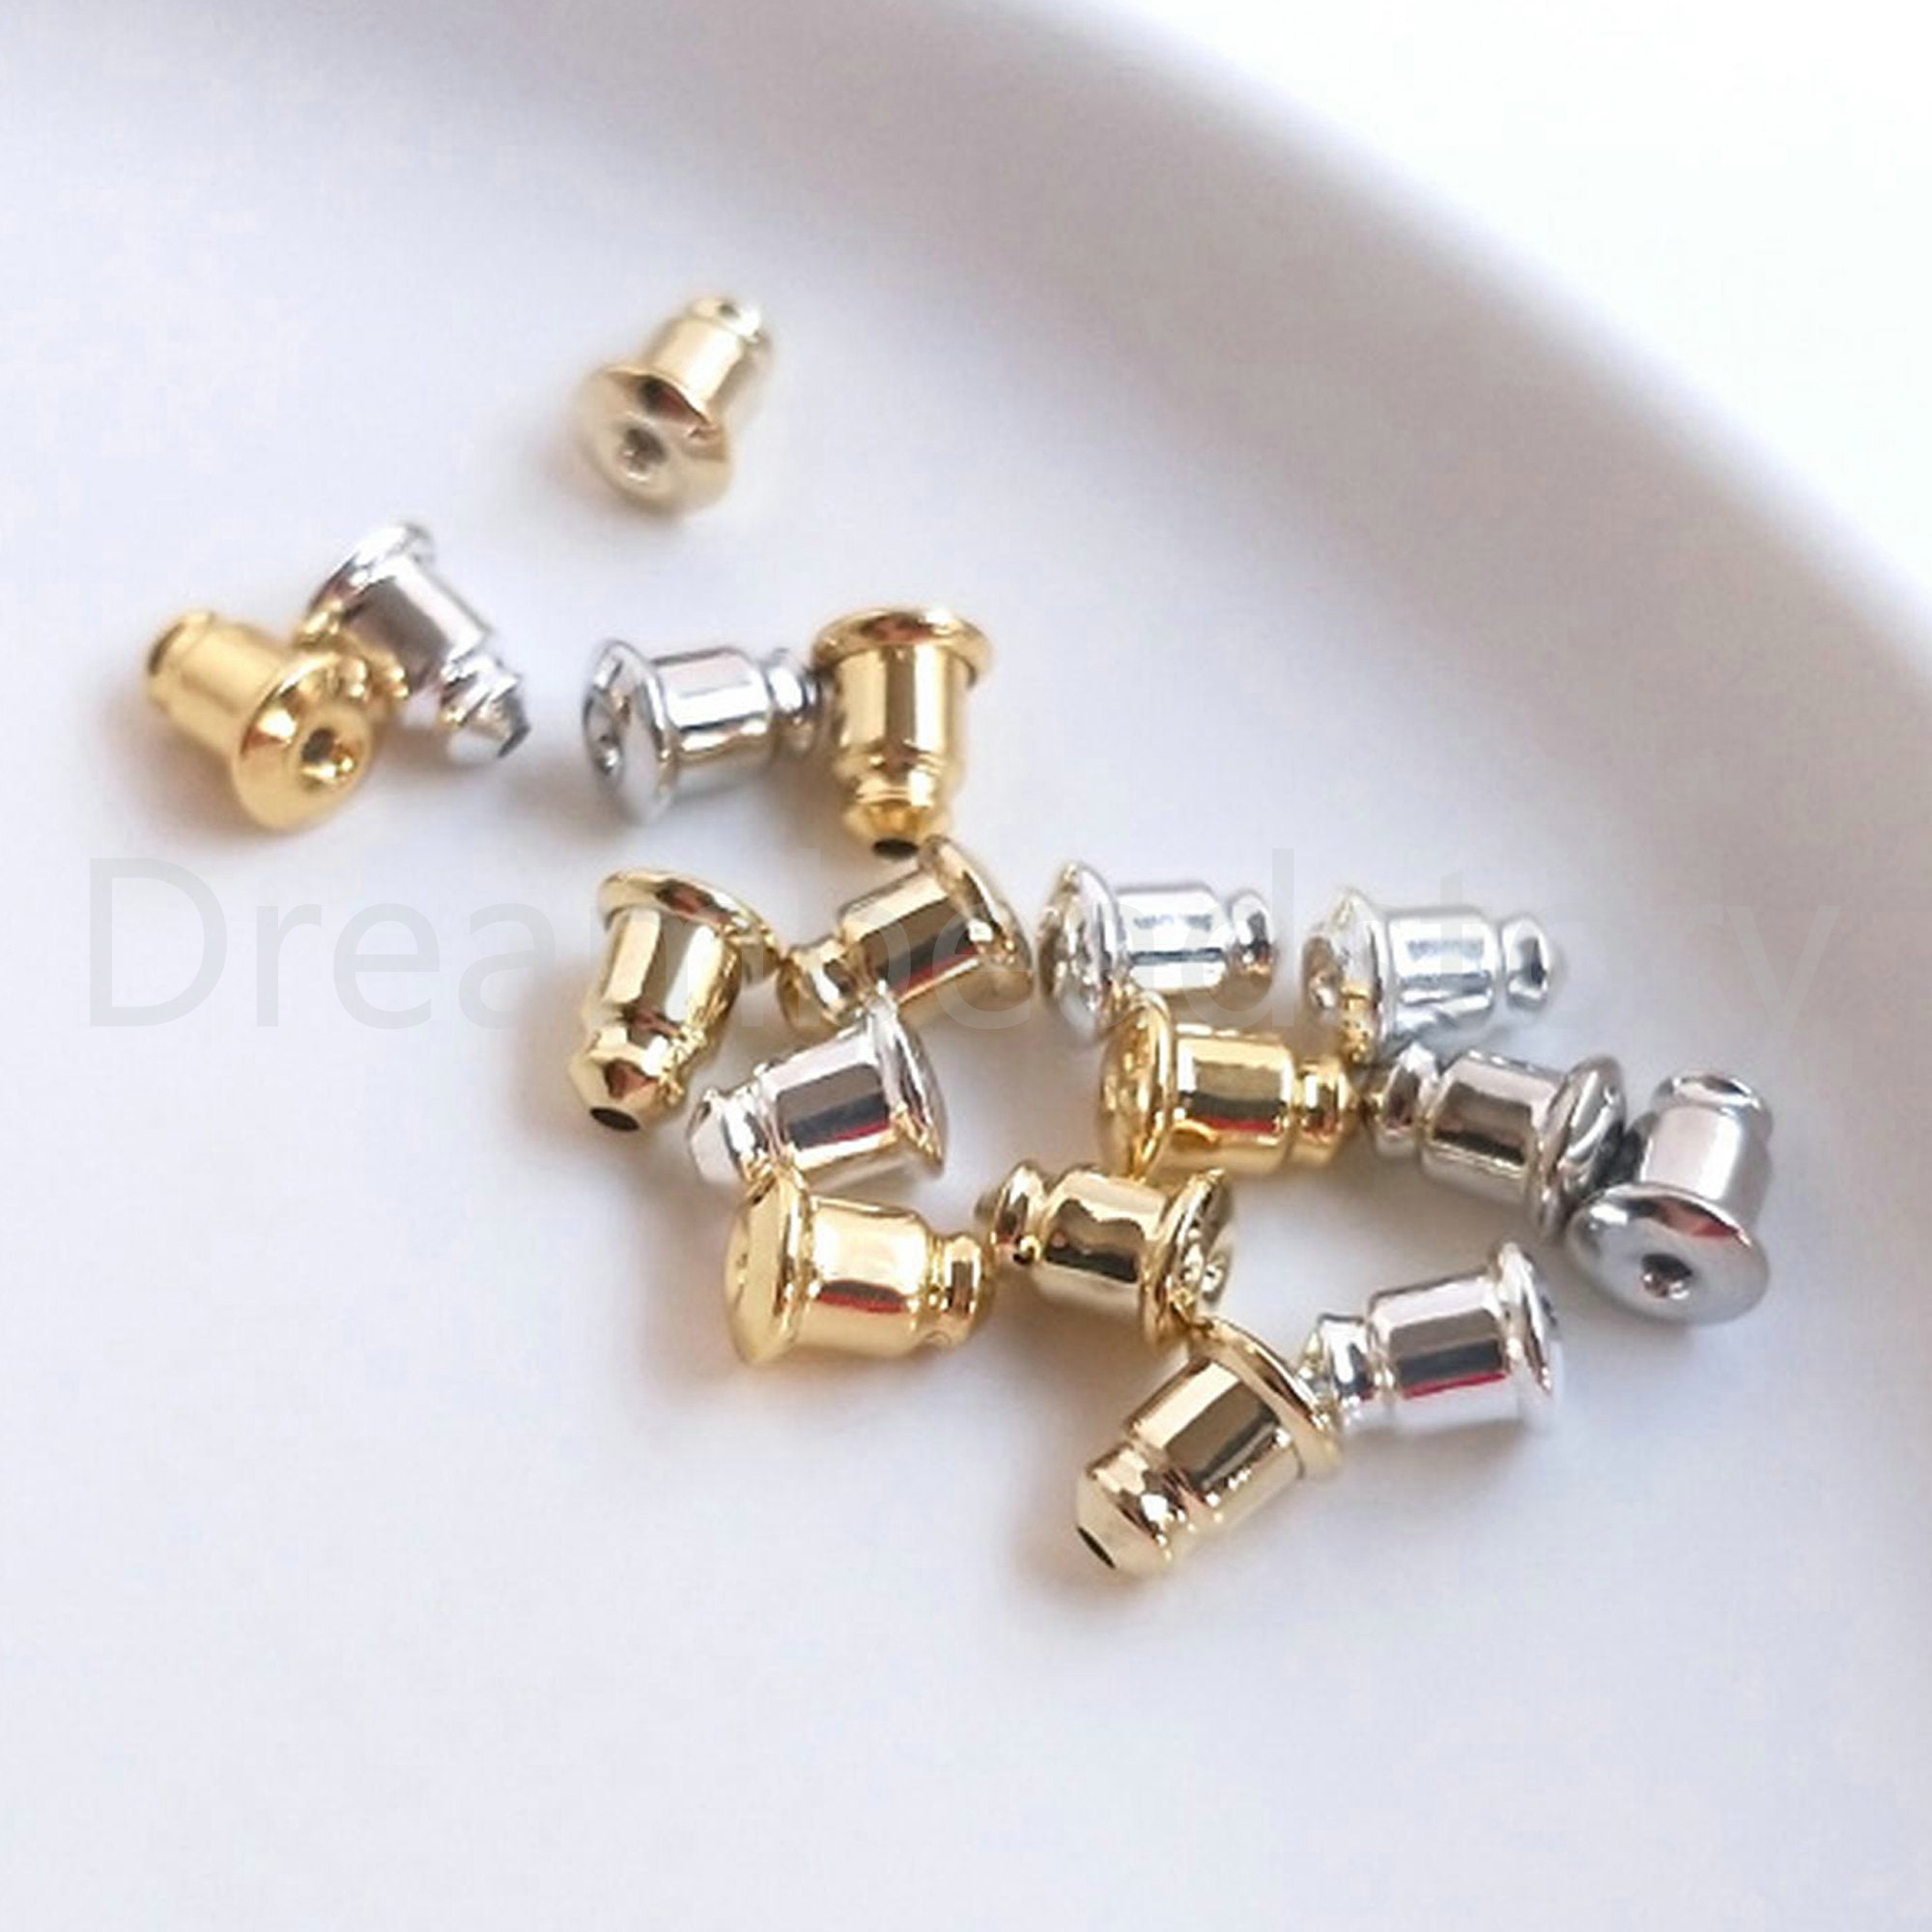  Fashewelry 20Pcs 925 Sterling Silver Bullet Clutch Earring  Backs Replacements Metal Ear Nuts Safety Earring Stoppers for Post Stud  Earrings Jewelry Making Accessories 4x3mm : Clothing, Shoes & Jewelry